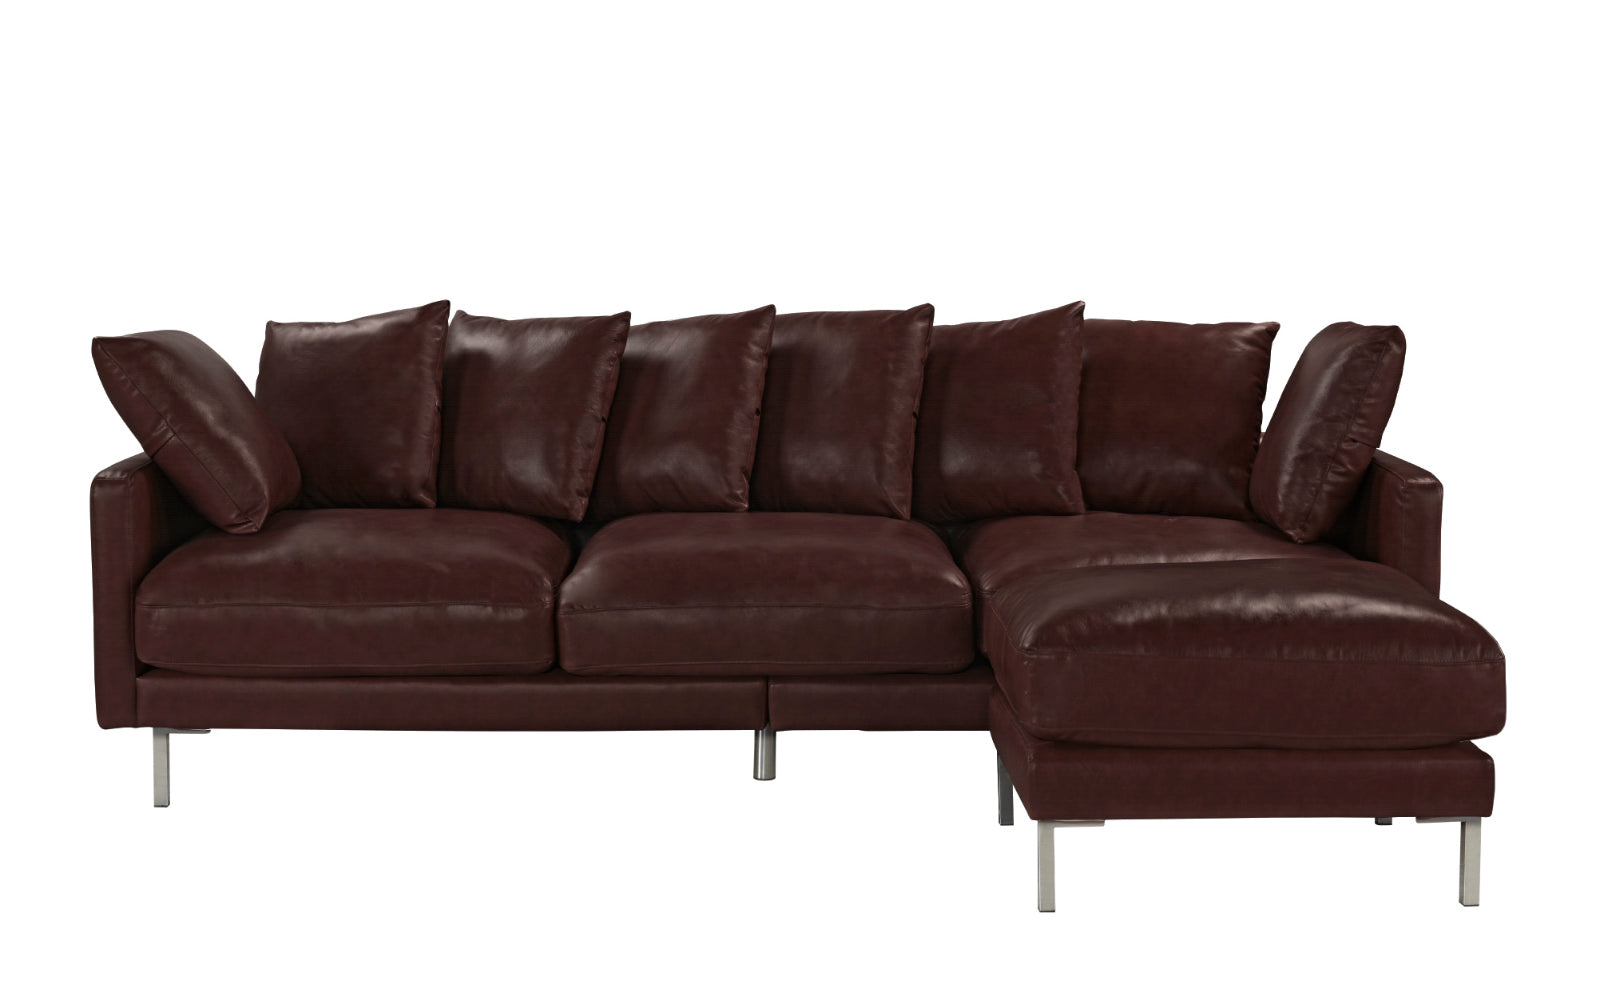 Albany Modern Leather Match Sectional Sofa with Steel Legs